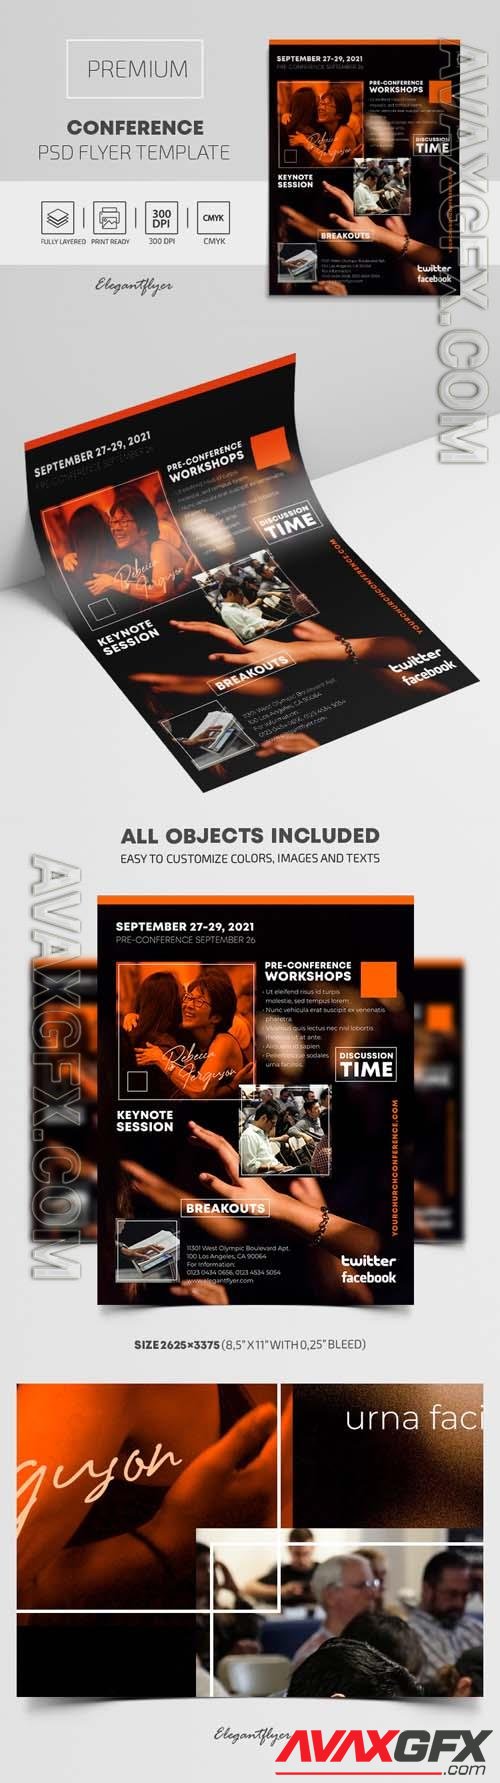 Church Conference – Premium PSD Flyer Template